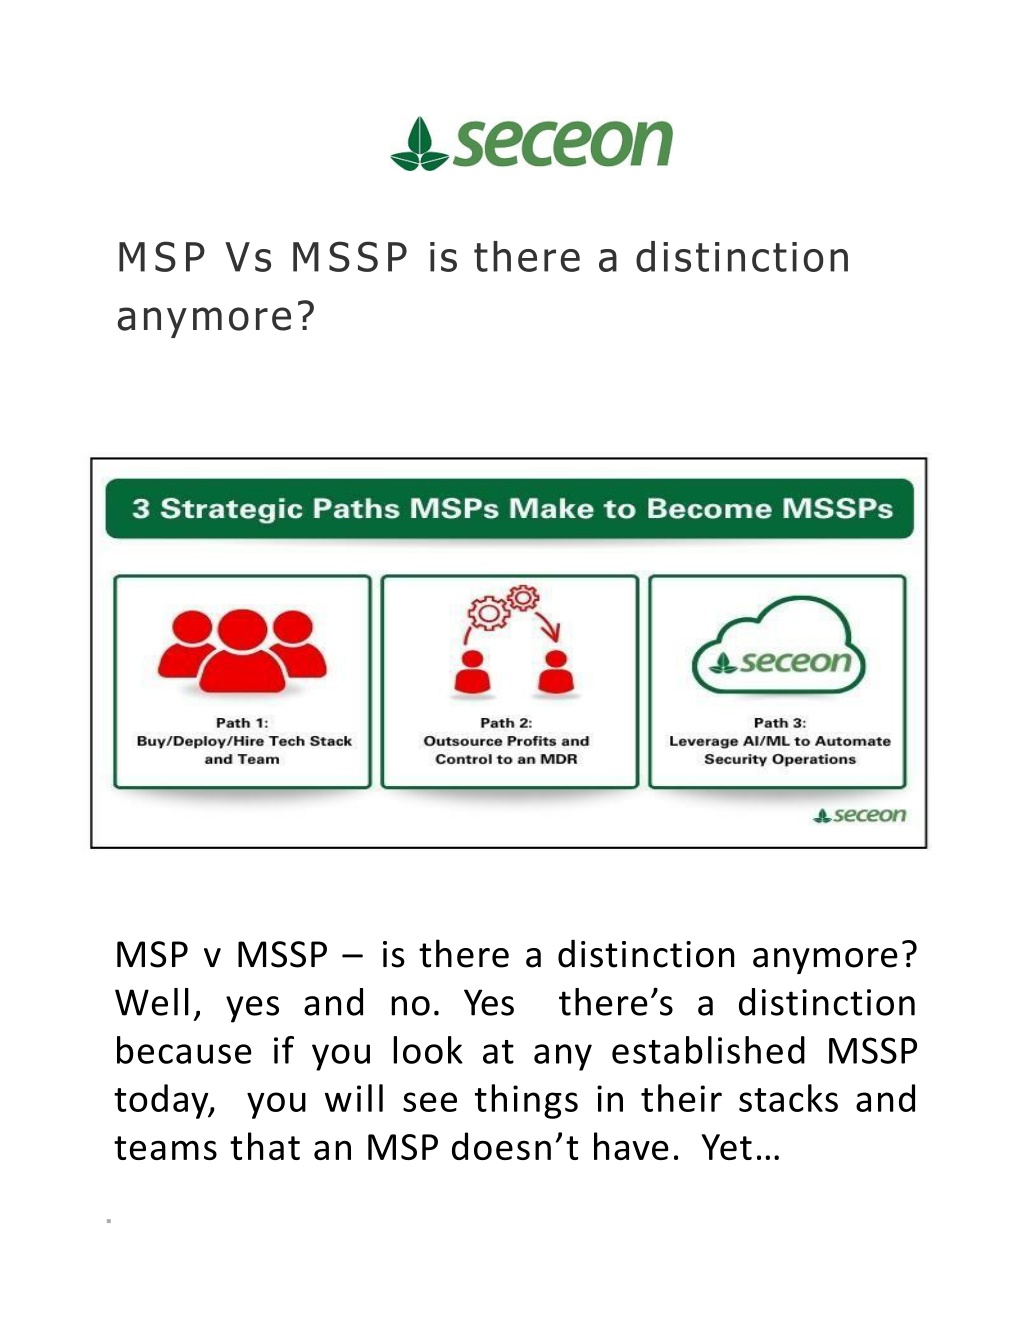 PPT - MSP Vs MSSP is there a distinction anymore PowerPoint ...